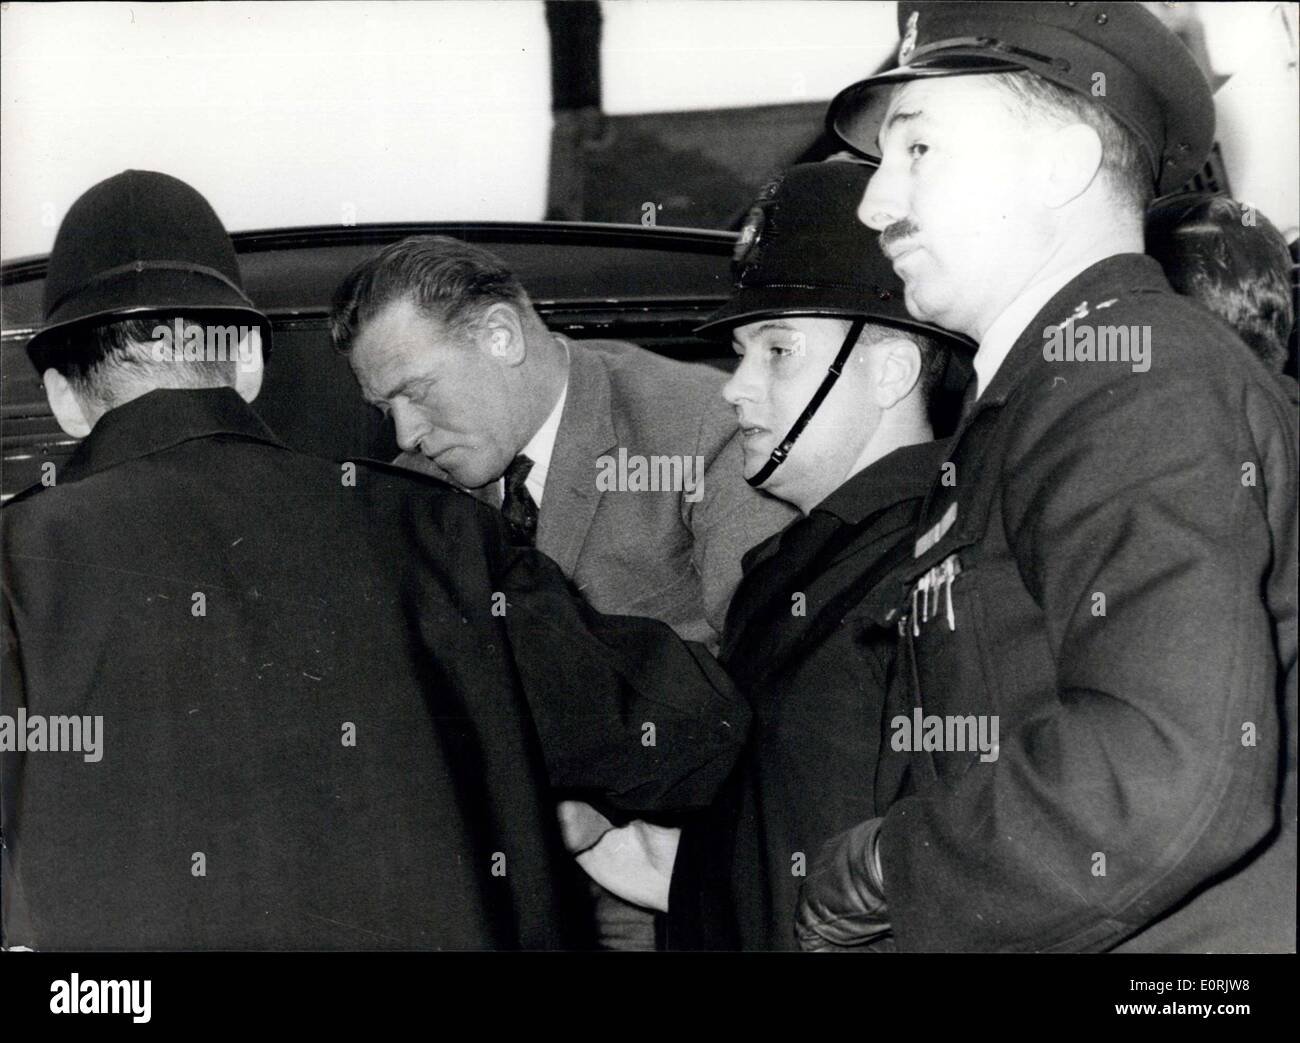 Dec. 12, 1959 - A Police Constable And Three Men Accused Of An 18,000 Bank Raid: 39-year-old Metropolitan Police-constable George Albert Askew was charged with three other men at Waltham Cross, Essex, yesterday of breaking into Chingford's National Provincial Bank and staling cash and jewellery worth 18,103. The men and two women - a mother and daughter were also accused of receiving part of the stolen money. All the accused were remanded for a week, the men in custody and the women on bail Stock Photo